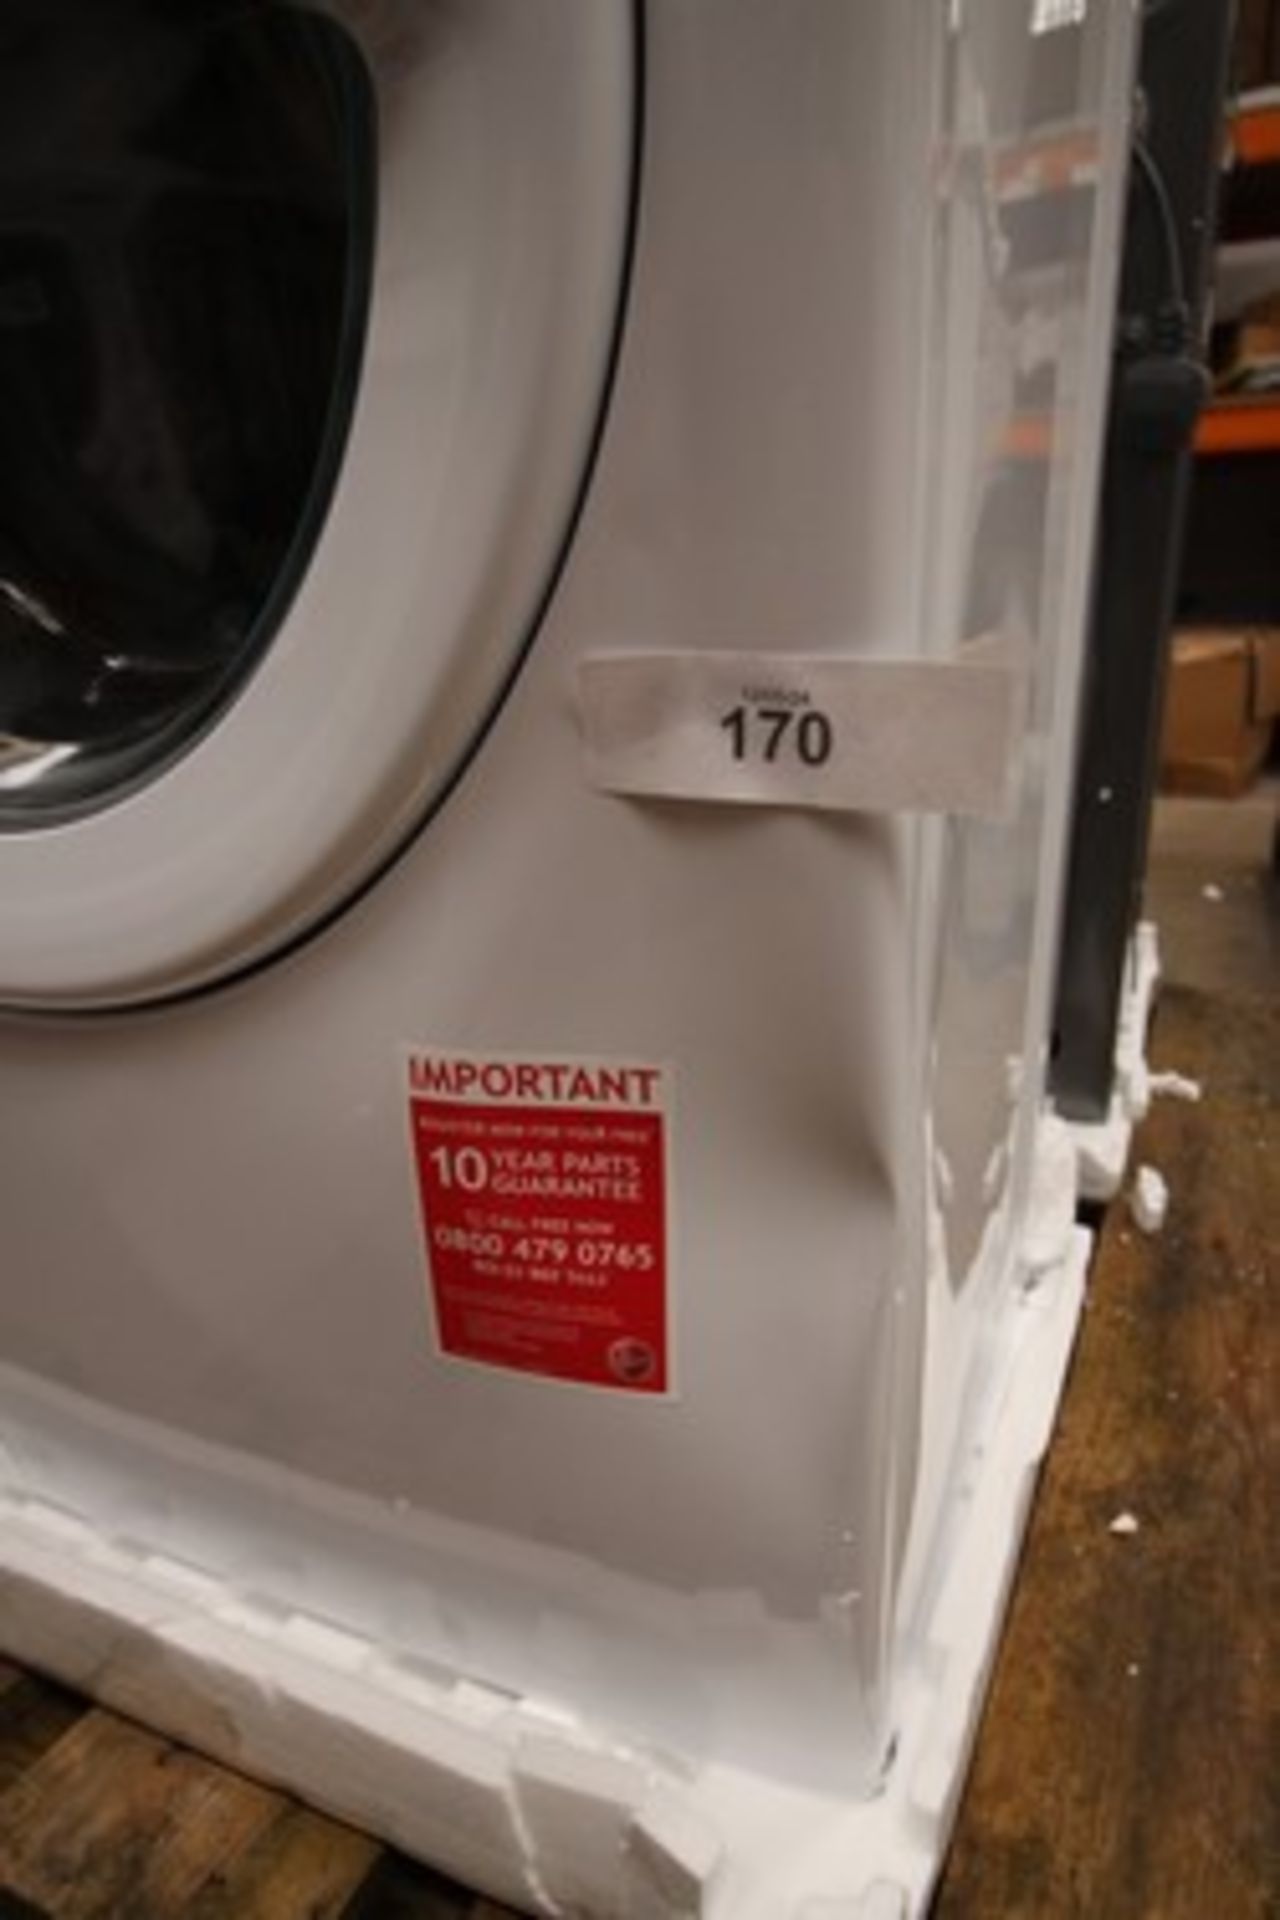 1 x Hoover H Wash 300 lite 7kg washing machine, Model H3W47TE/1-80, dented front panel (RHS) - - Image 2 of 3